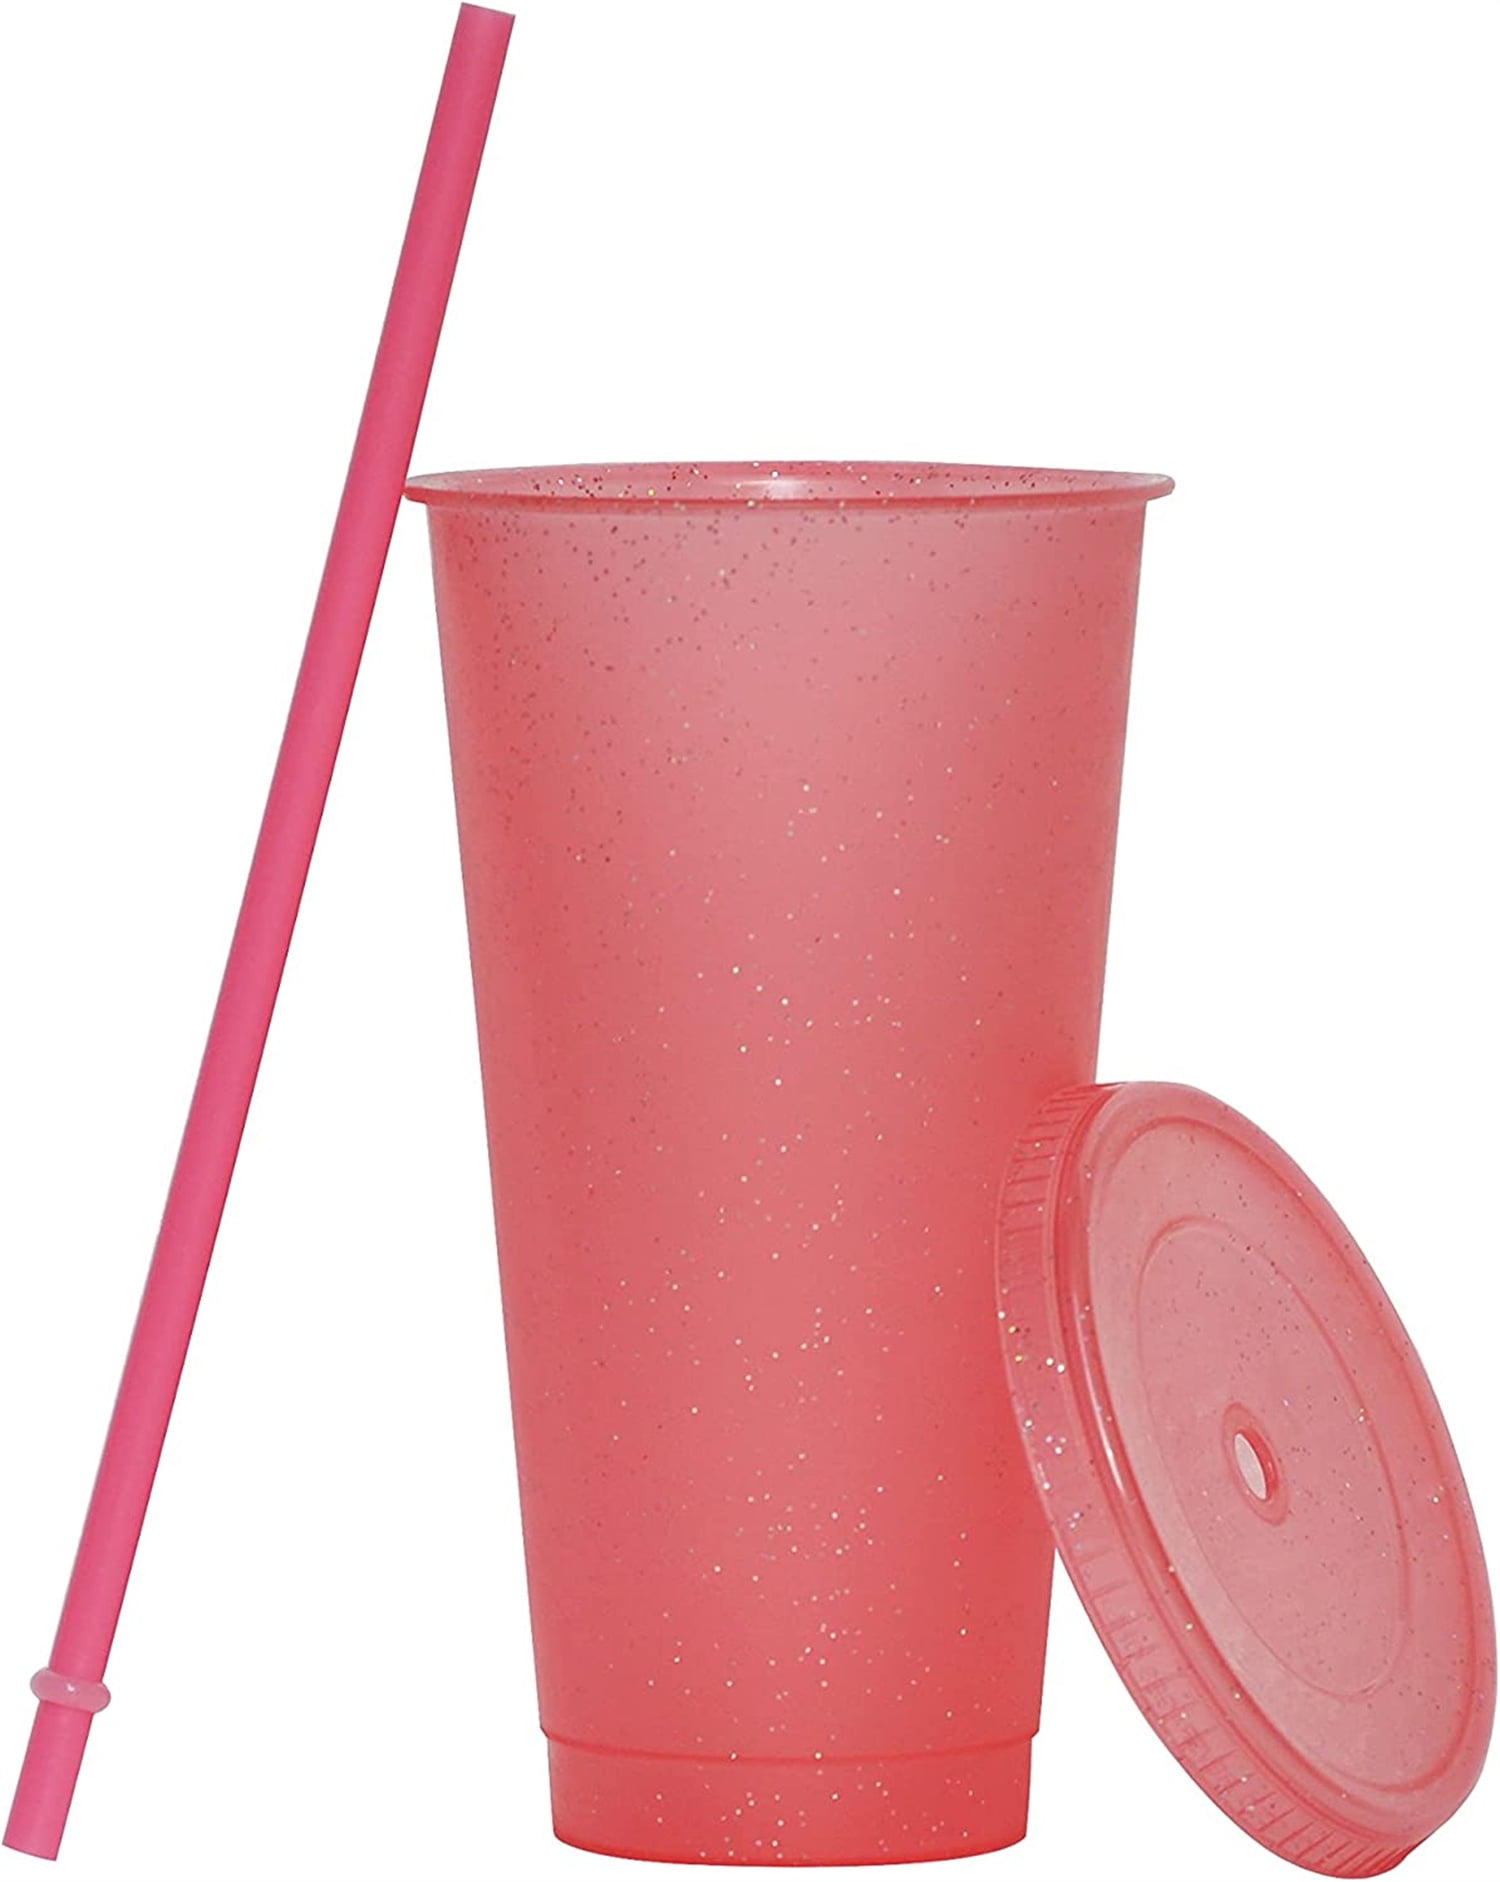 Reusable Plastic Cups with Lids Straws: 12Pcs 16oz Colorful Bulk Party  Cups/BPA-Free Dishwasher-Safe…See more Reusable Plastic Cups with Lids  Straws